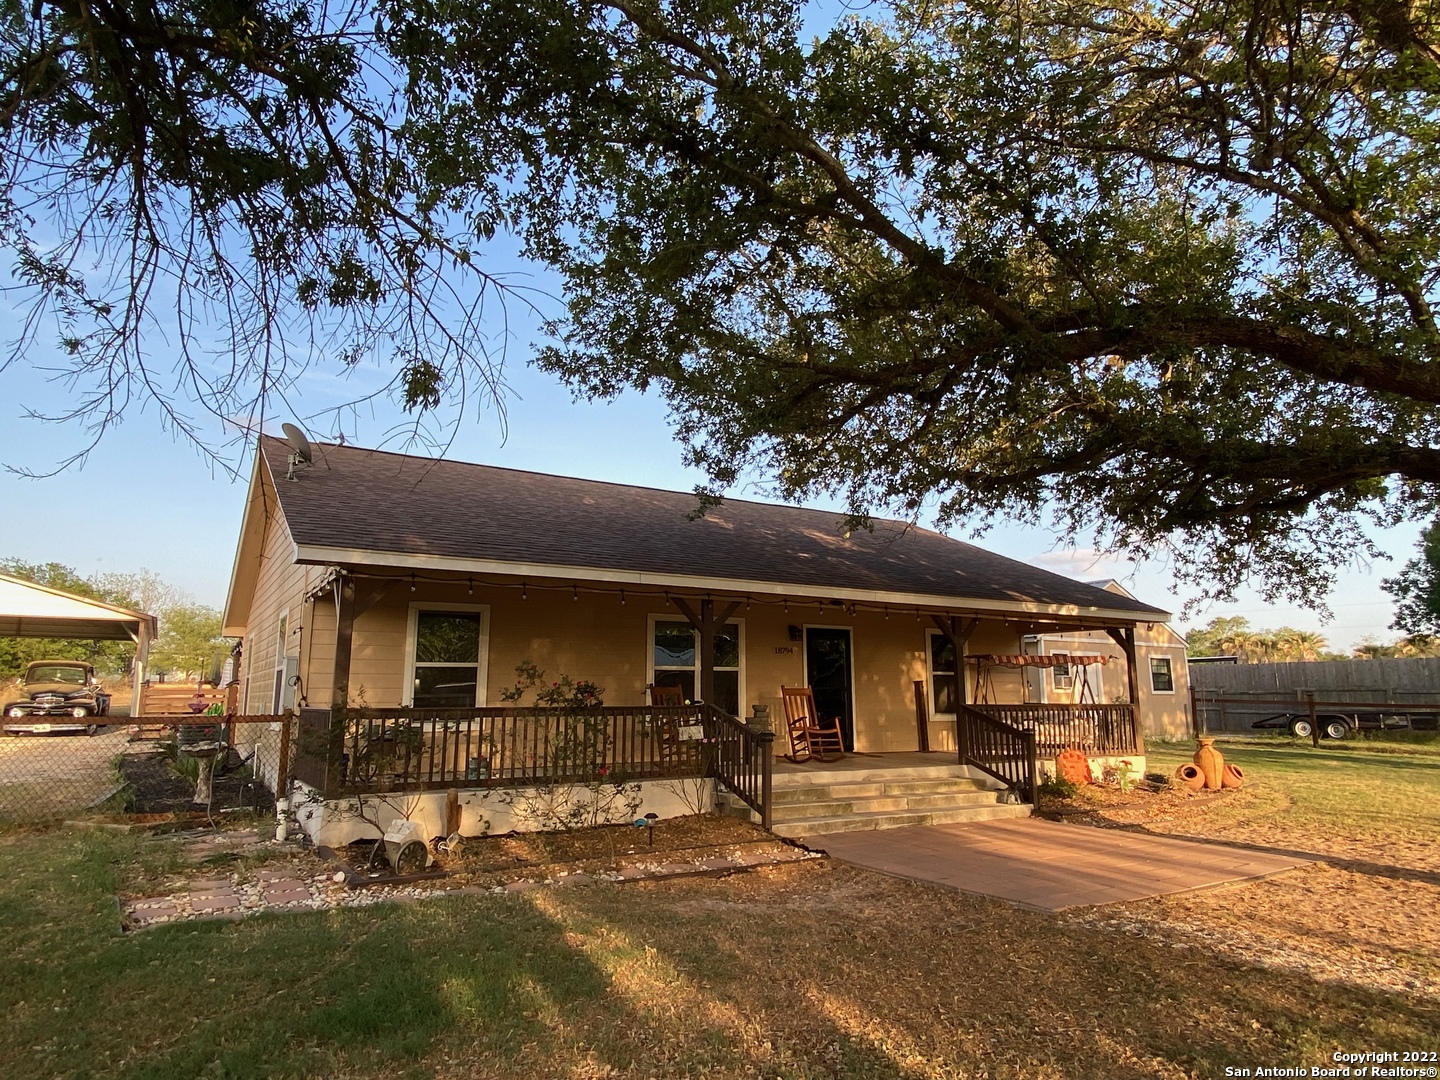 This property consist of an immaculate, well kept 3/2 main home, a 2/1 mother-in-law home, a 20x40 "She Shed" & a 16x16 office/workshop, all with ac. Add a 30x30 lighted courtyard, for back yard BBQ gatherings & new cedar fencing, surrounds the yard, with solar powered lighted posts, for night time parties. Add a 24x40 carport, on a concrete slab & an additional 12x20 open carport. Two blocks from City Park! (FYI, Mother-in-law home has a separate tax #0259000040000905) This rare find, is just waiting for the right family, to utilize the opportunity for family gatherings or an additional rental income. An added plus is an abundance of wild grape vines, producing wild mustang grapes, for excellent grape wine & a small herd of deer visit every night! MOVE FAST-WON'T LAST!